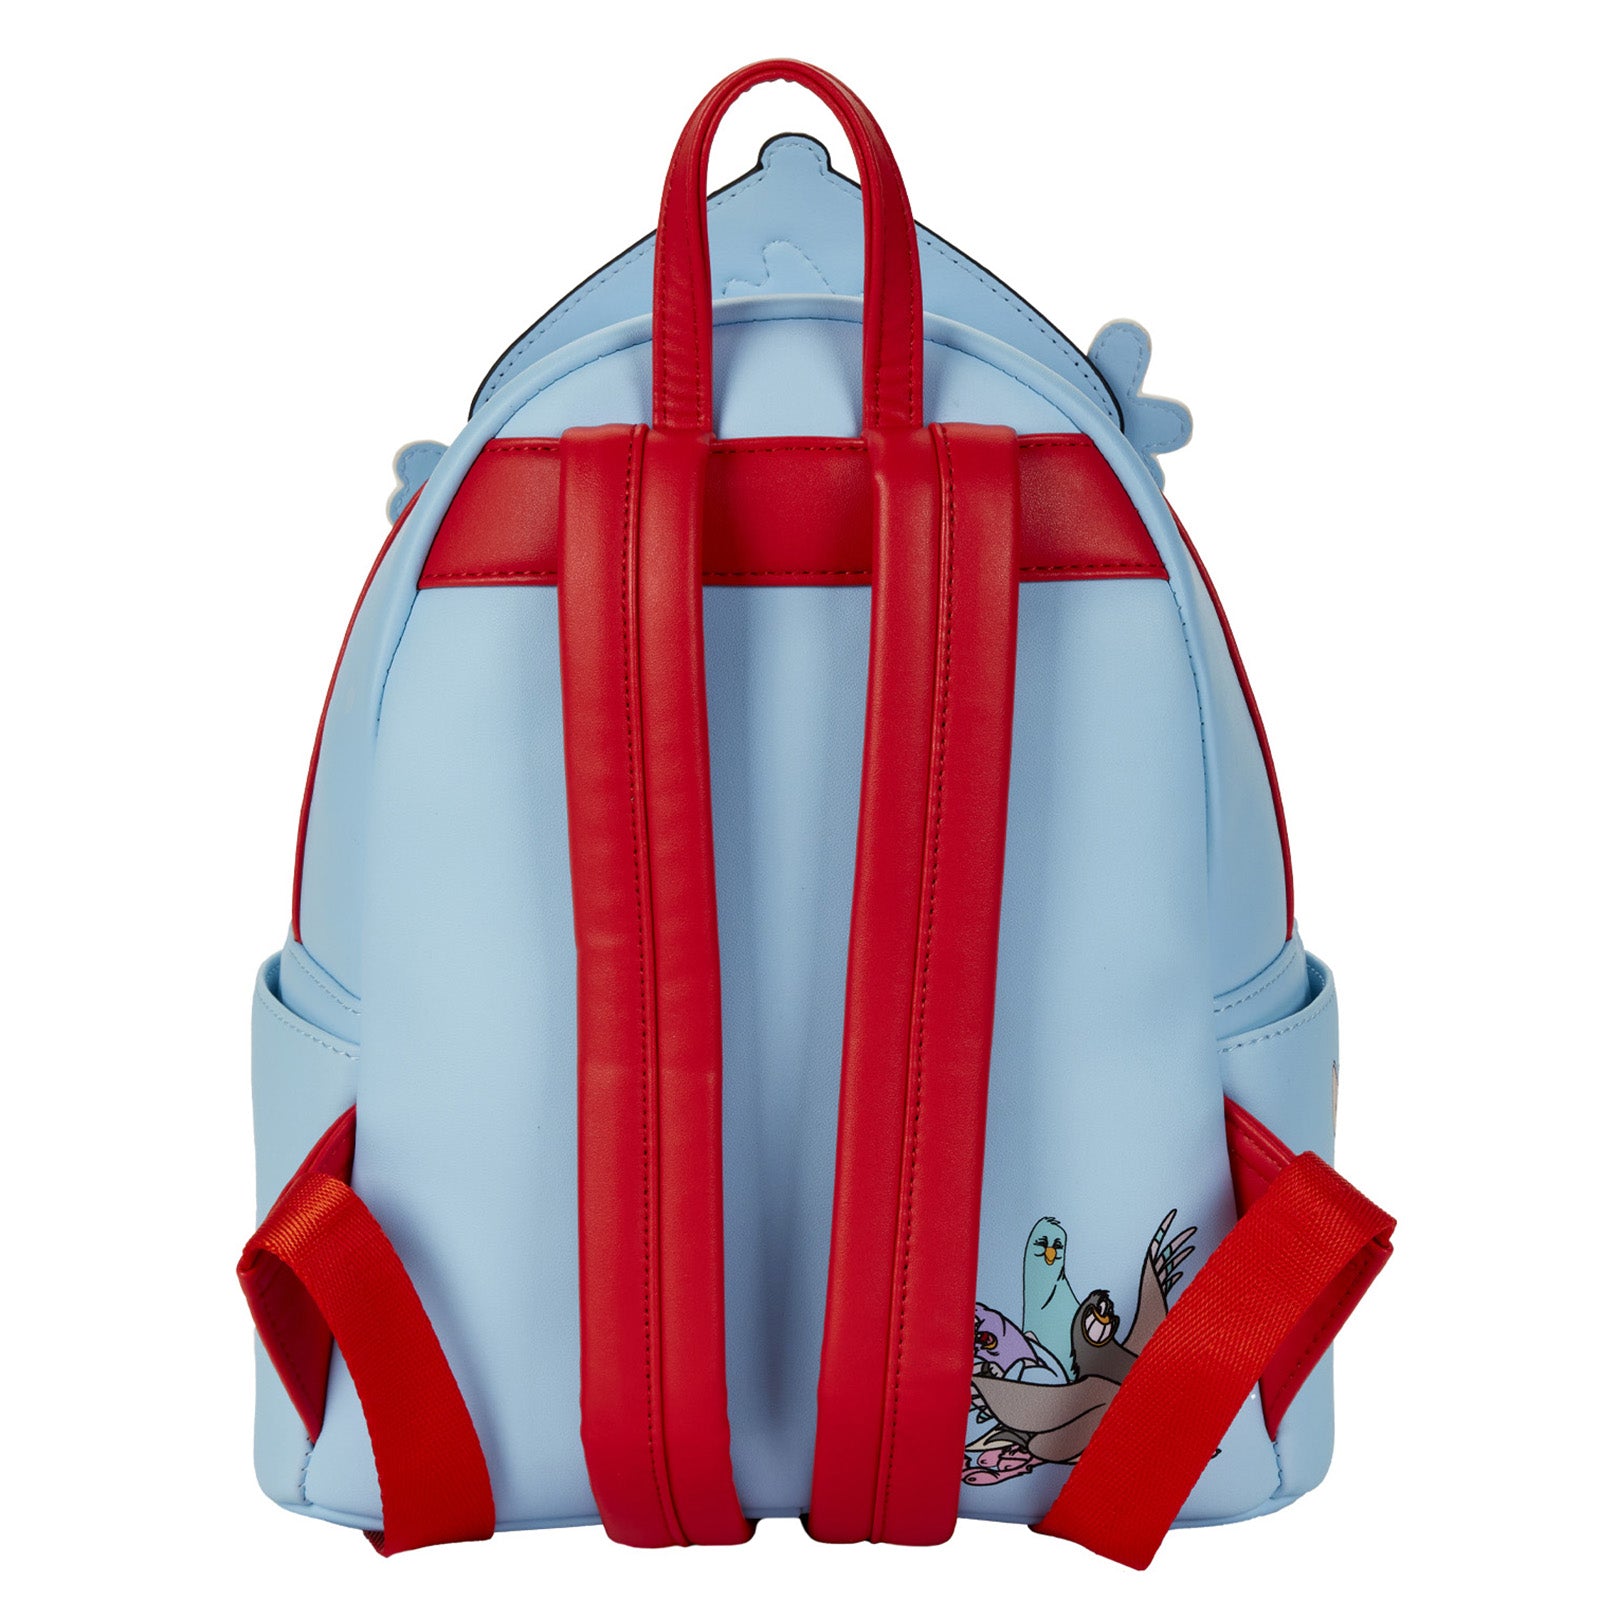 Animaniacs - WB Tower Loungefly Mini Backpack